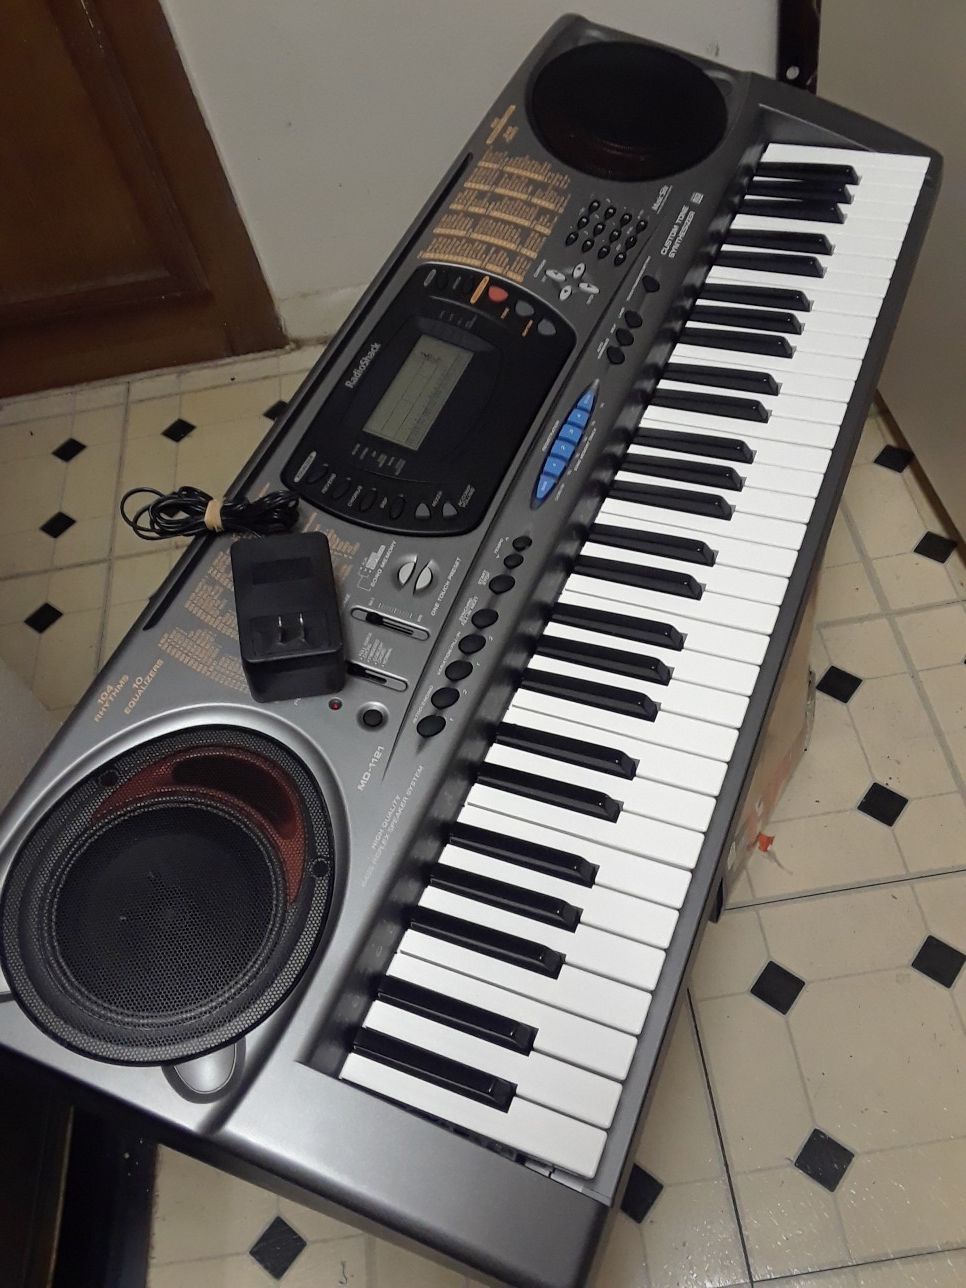 MD-1211 RADIOSHACK PIANO KEYBOARD. ADAPTER CORD INCLUDED. IN PERFECT CONDITION. WITH LOTS OF FEATURES AND HIGH QUALITY SPEAKERS